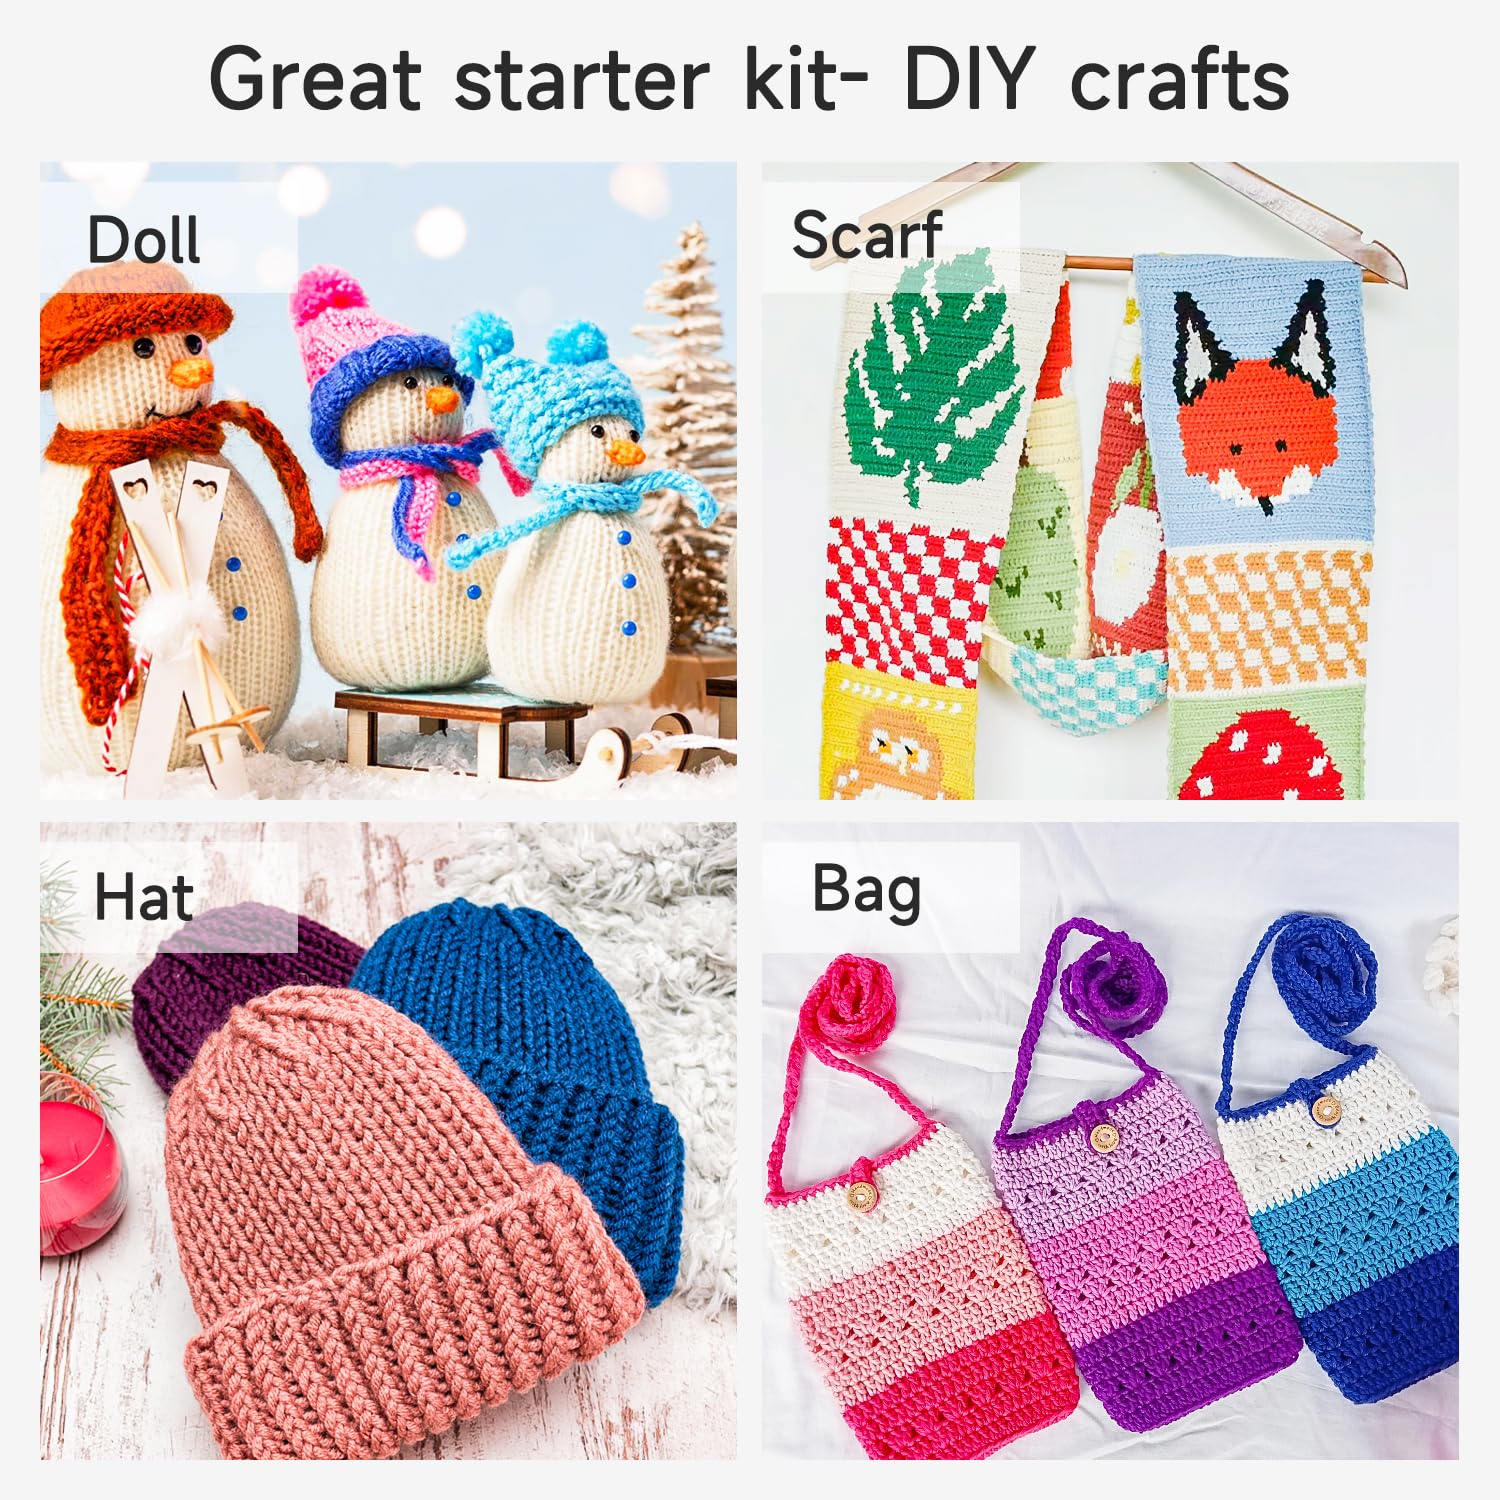 INSCRAFT Crochet Kit for Beginners Adults, 18 Large Acrylic Yarn Skeins 1800 Yards Yarn, 105 PCS Crochet Kit with Hooks Yarn Set,Includes Canvas Tote Bag, Ideal Starter Pack for Kids Professionals